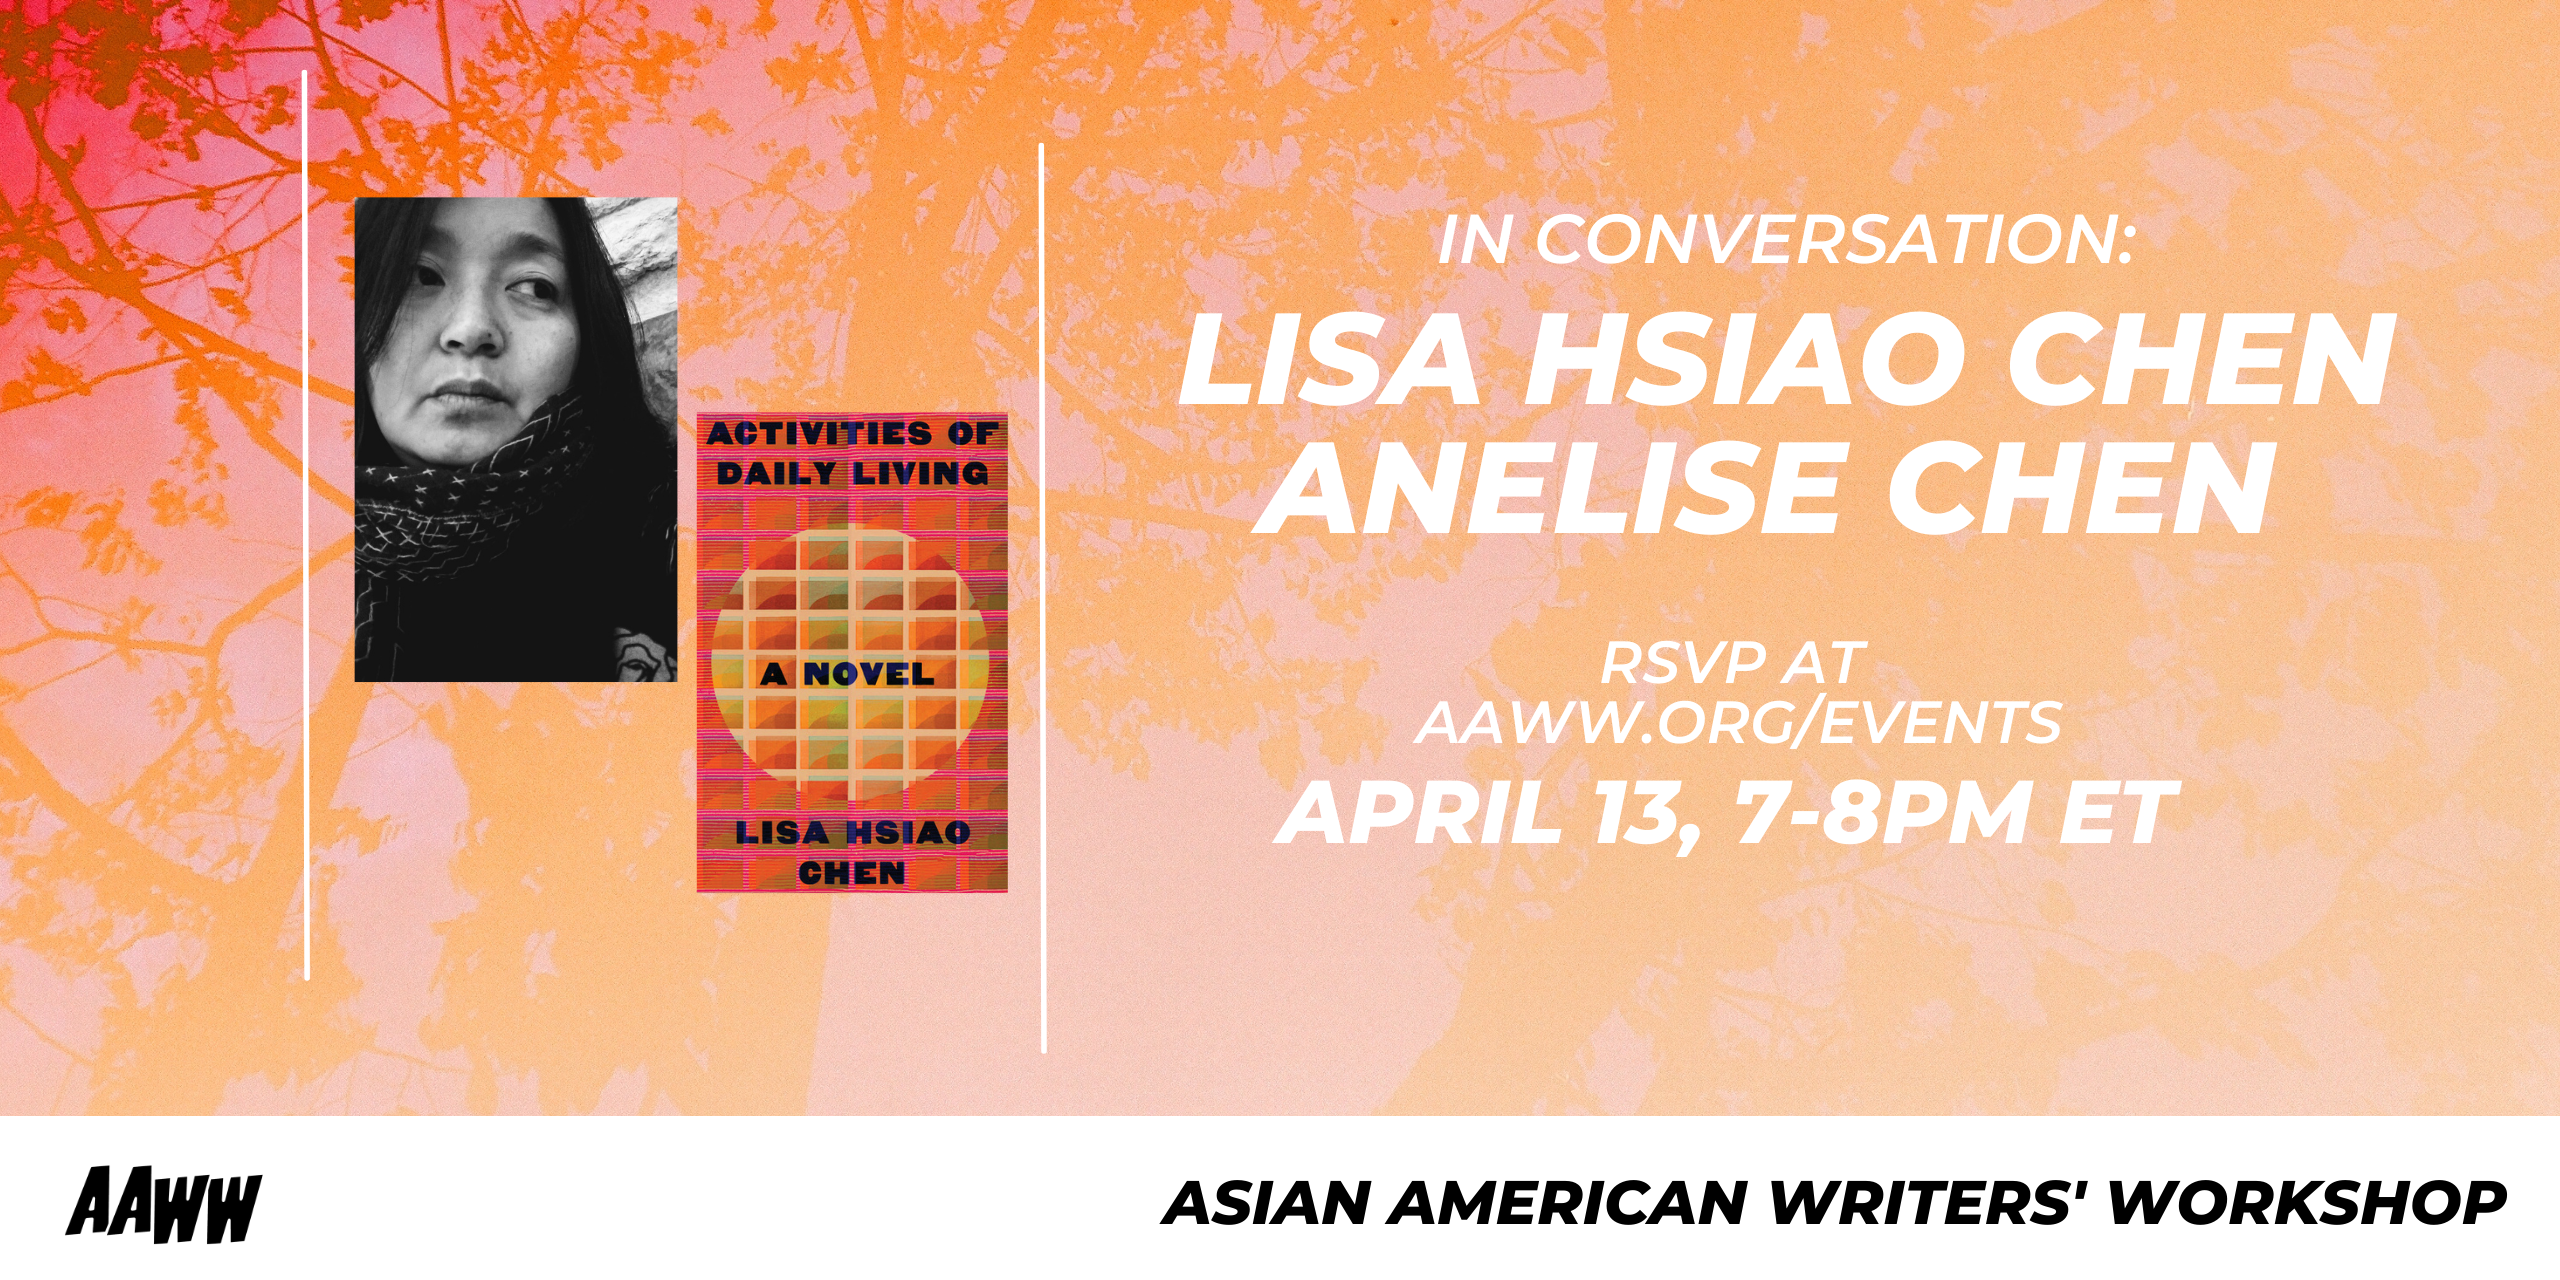 [VIRTUAL] In Conversation: Lisa Hsiao Chen and Anelise Chen